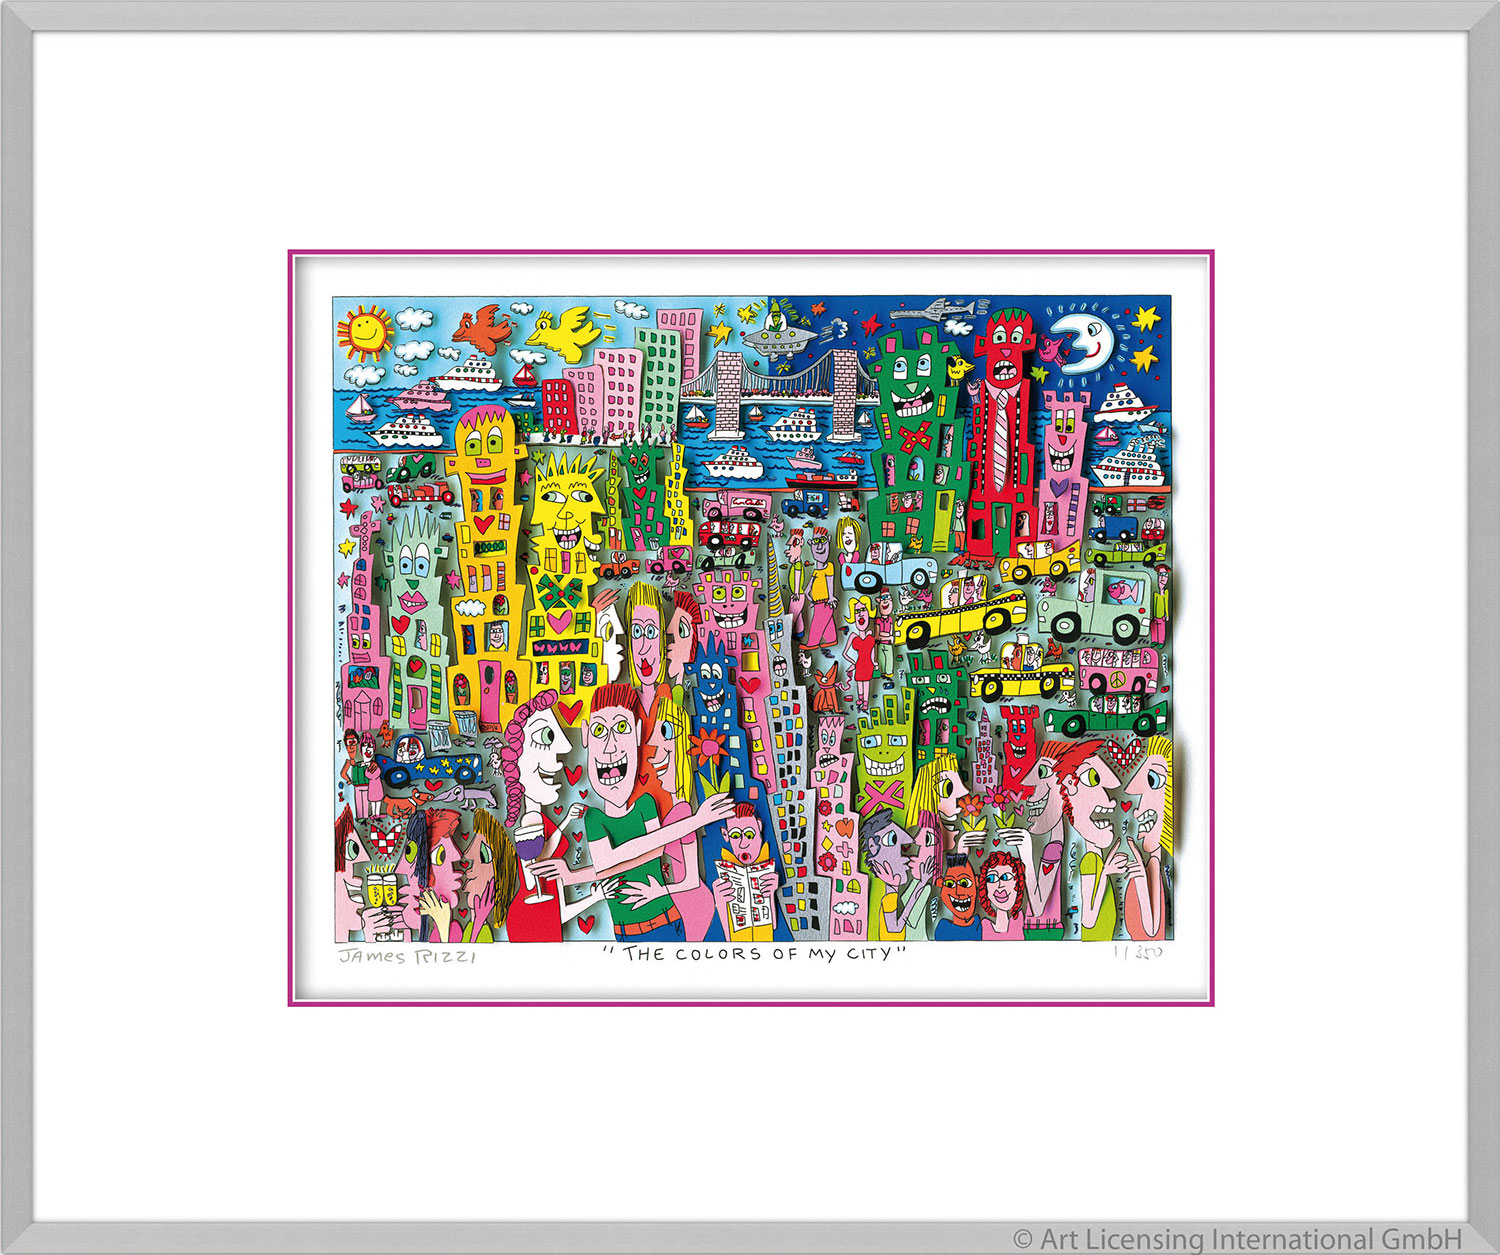 3D Picture "The Colors of my City" (2017), framed by James Rizzi